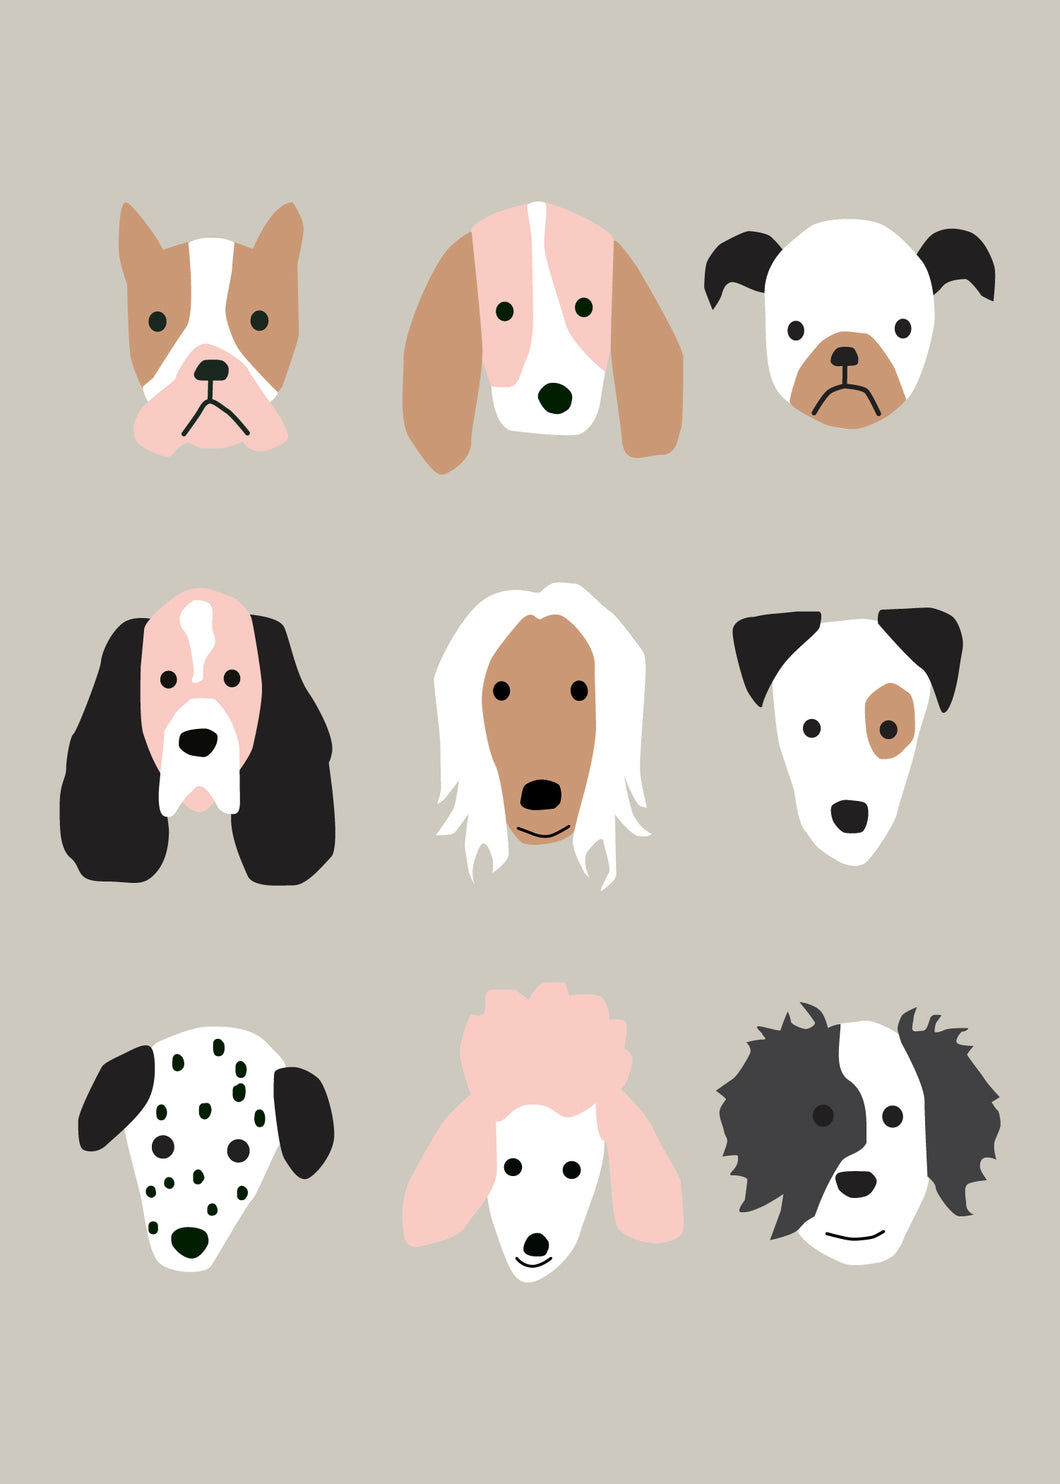 Puppy Faces posters - gray background